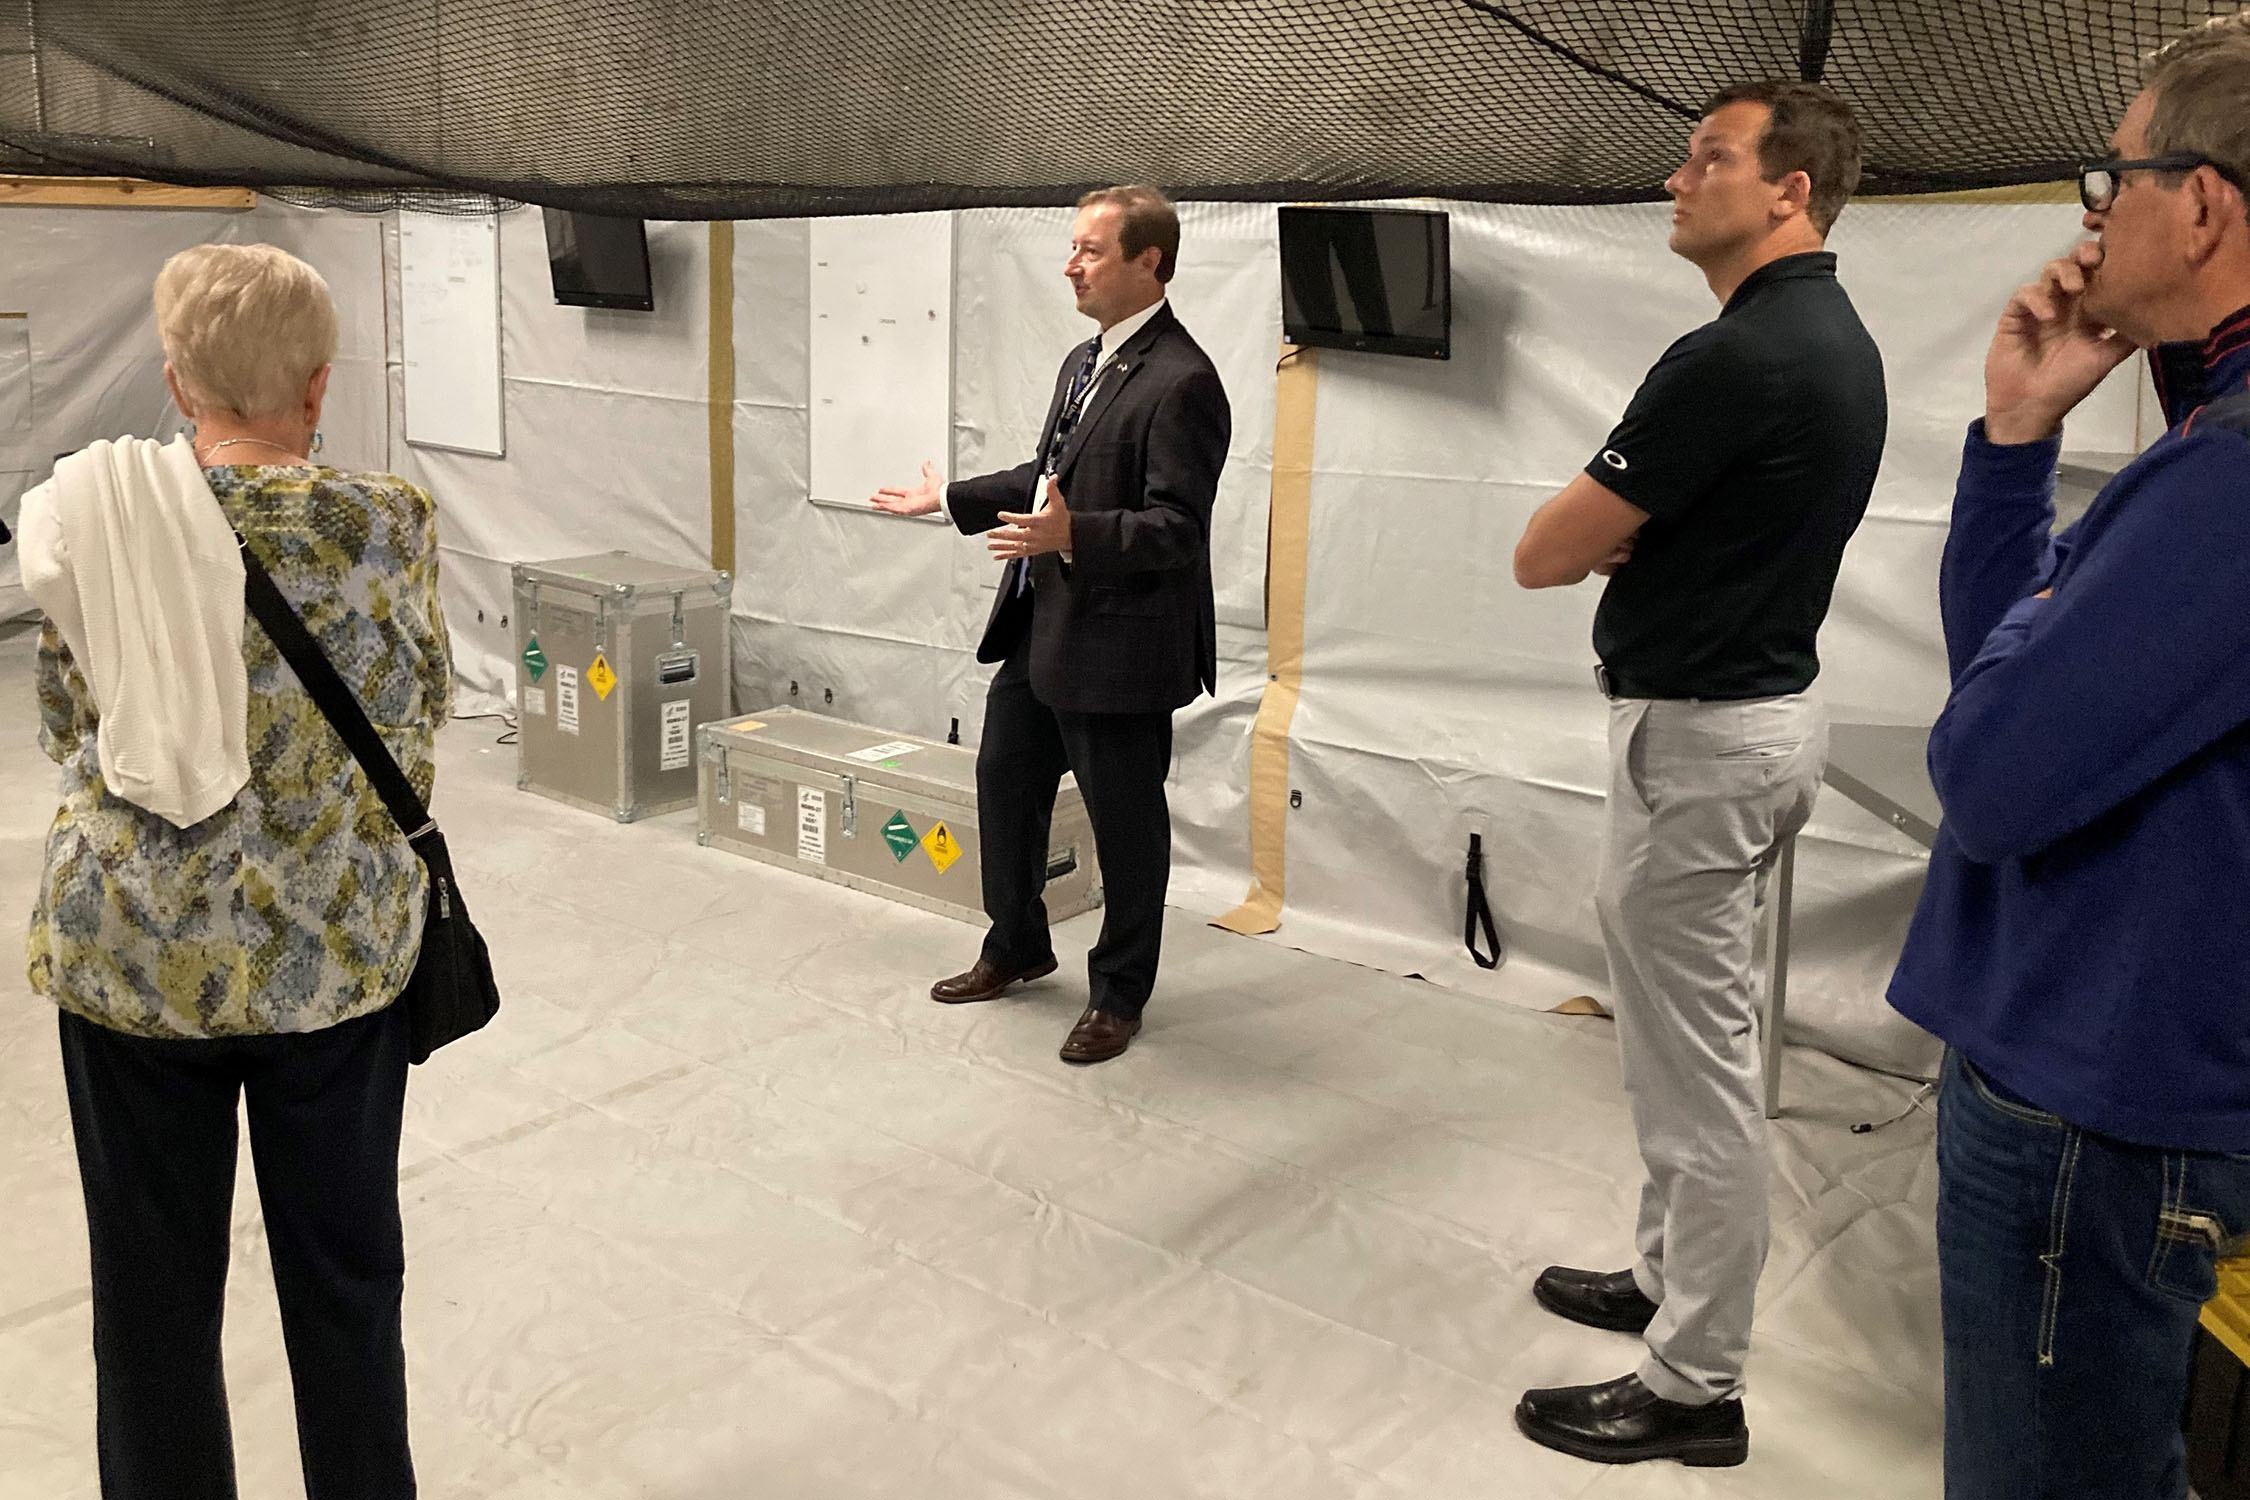 Chris Kratochvil&comma; senior advisor to UNMC’s Global Center for Health Security and interim vice chancellor of external relations&comma; shows economists with the National Business Economic Issues Council an austere training environment housed within the Davis Global Center&period;